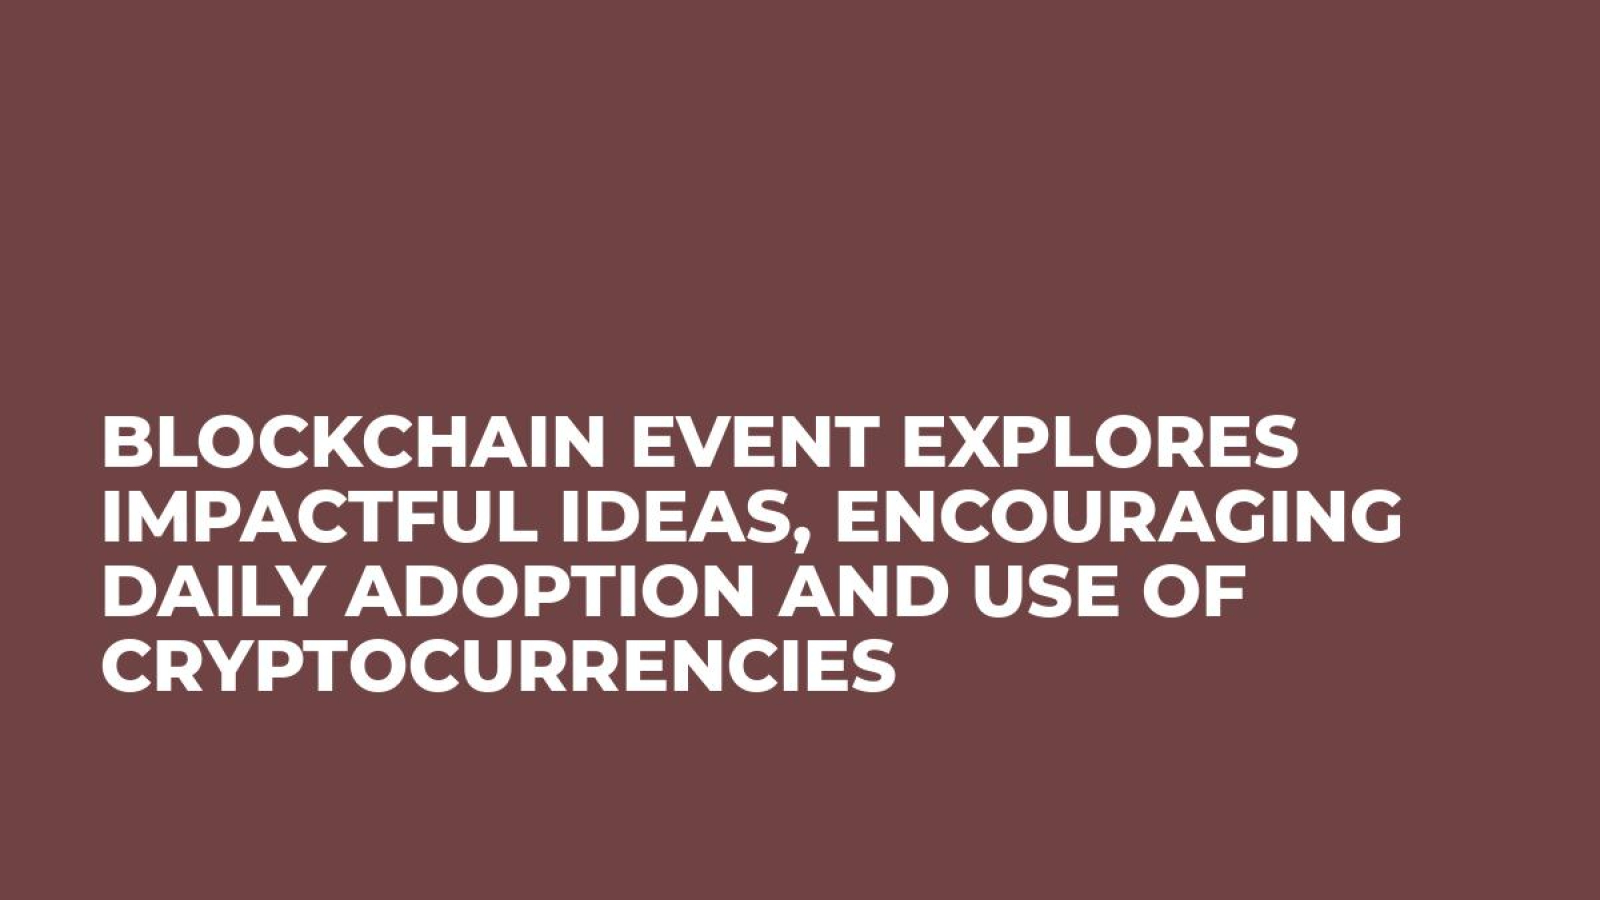 Blockchain event explores impactful ideas, encouraging daily adoption and use of cryptocurrencies